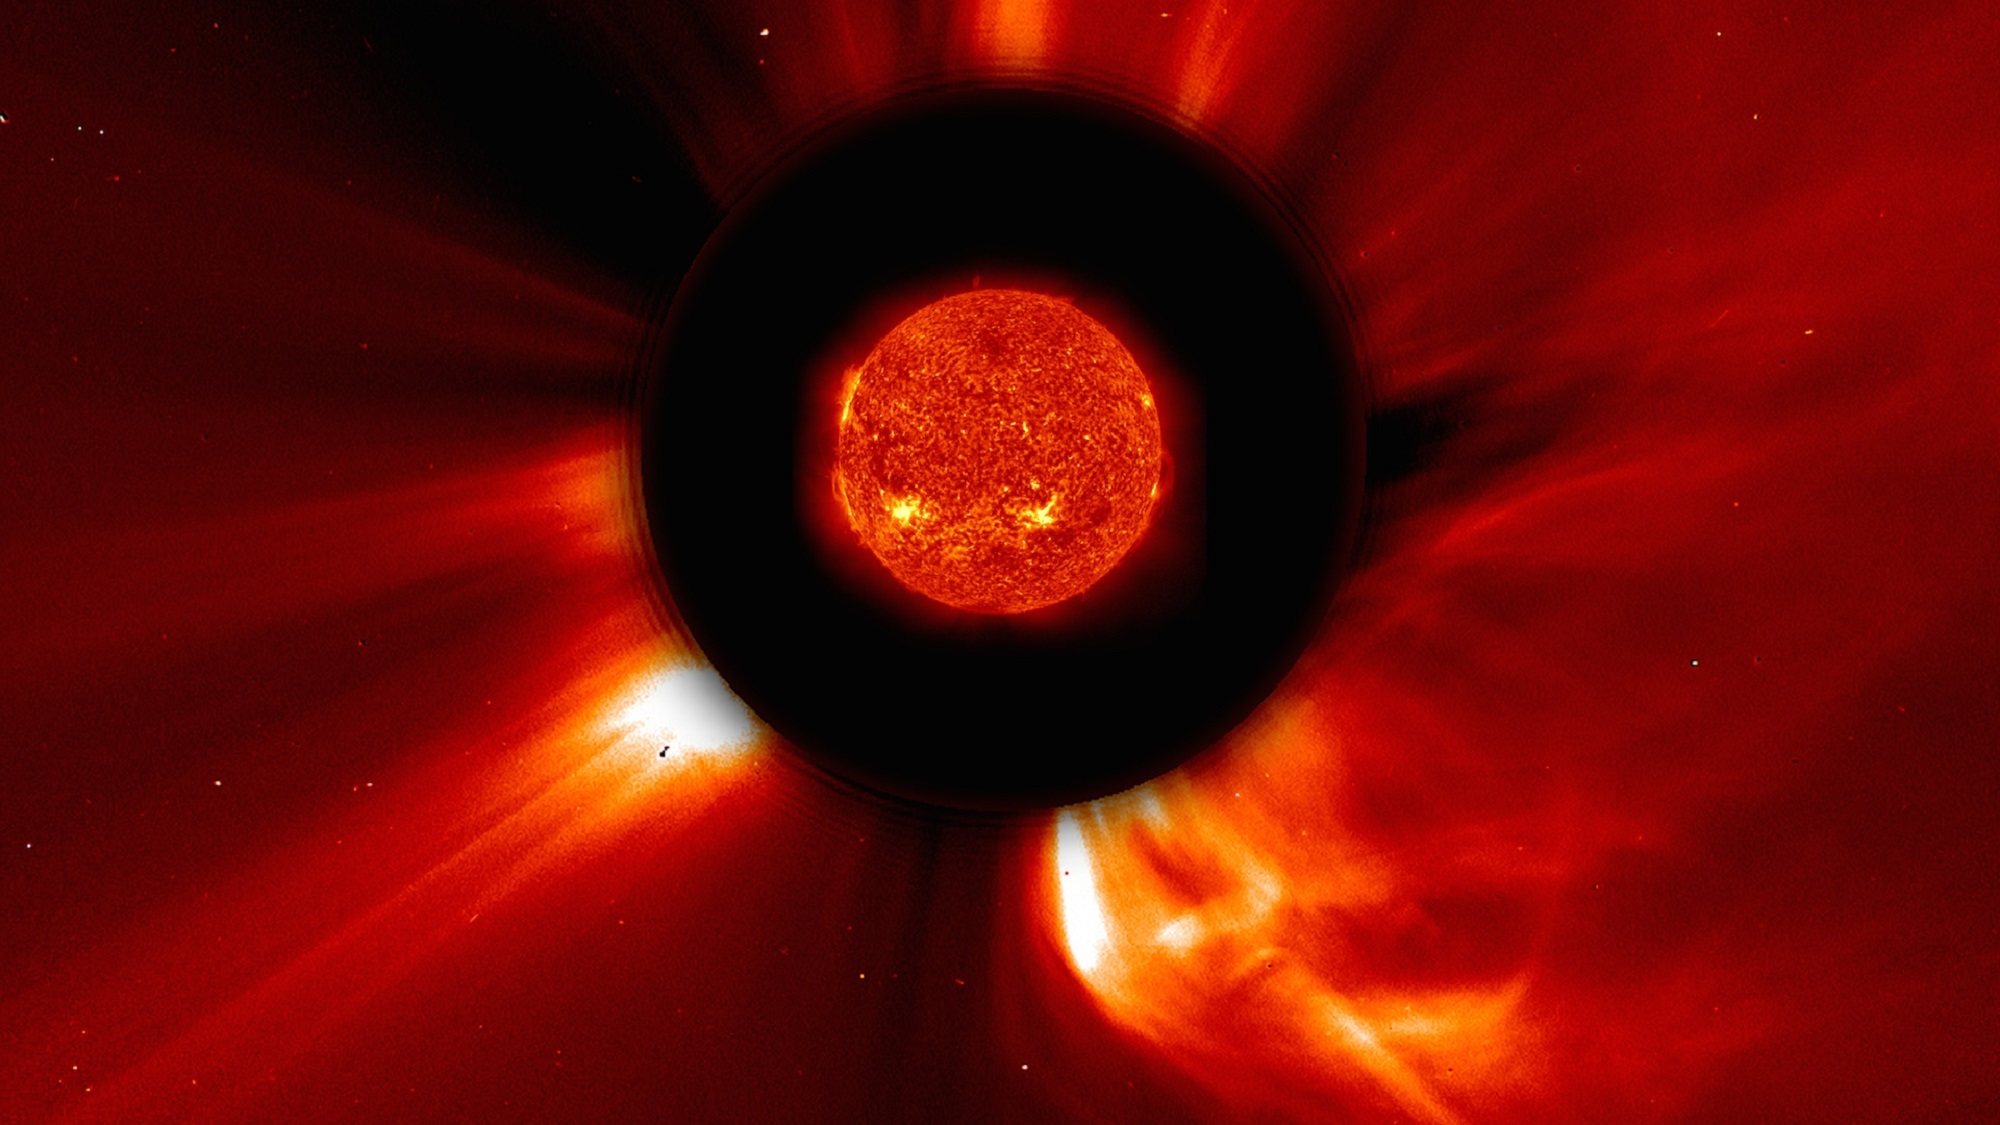 Heat of sun radiating through cold of space